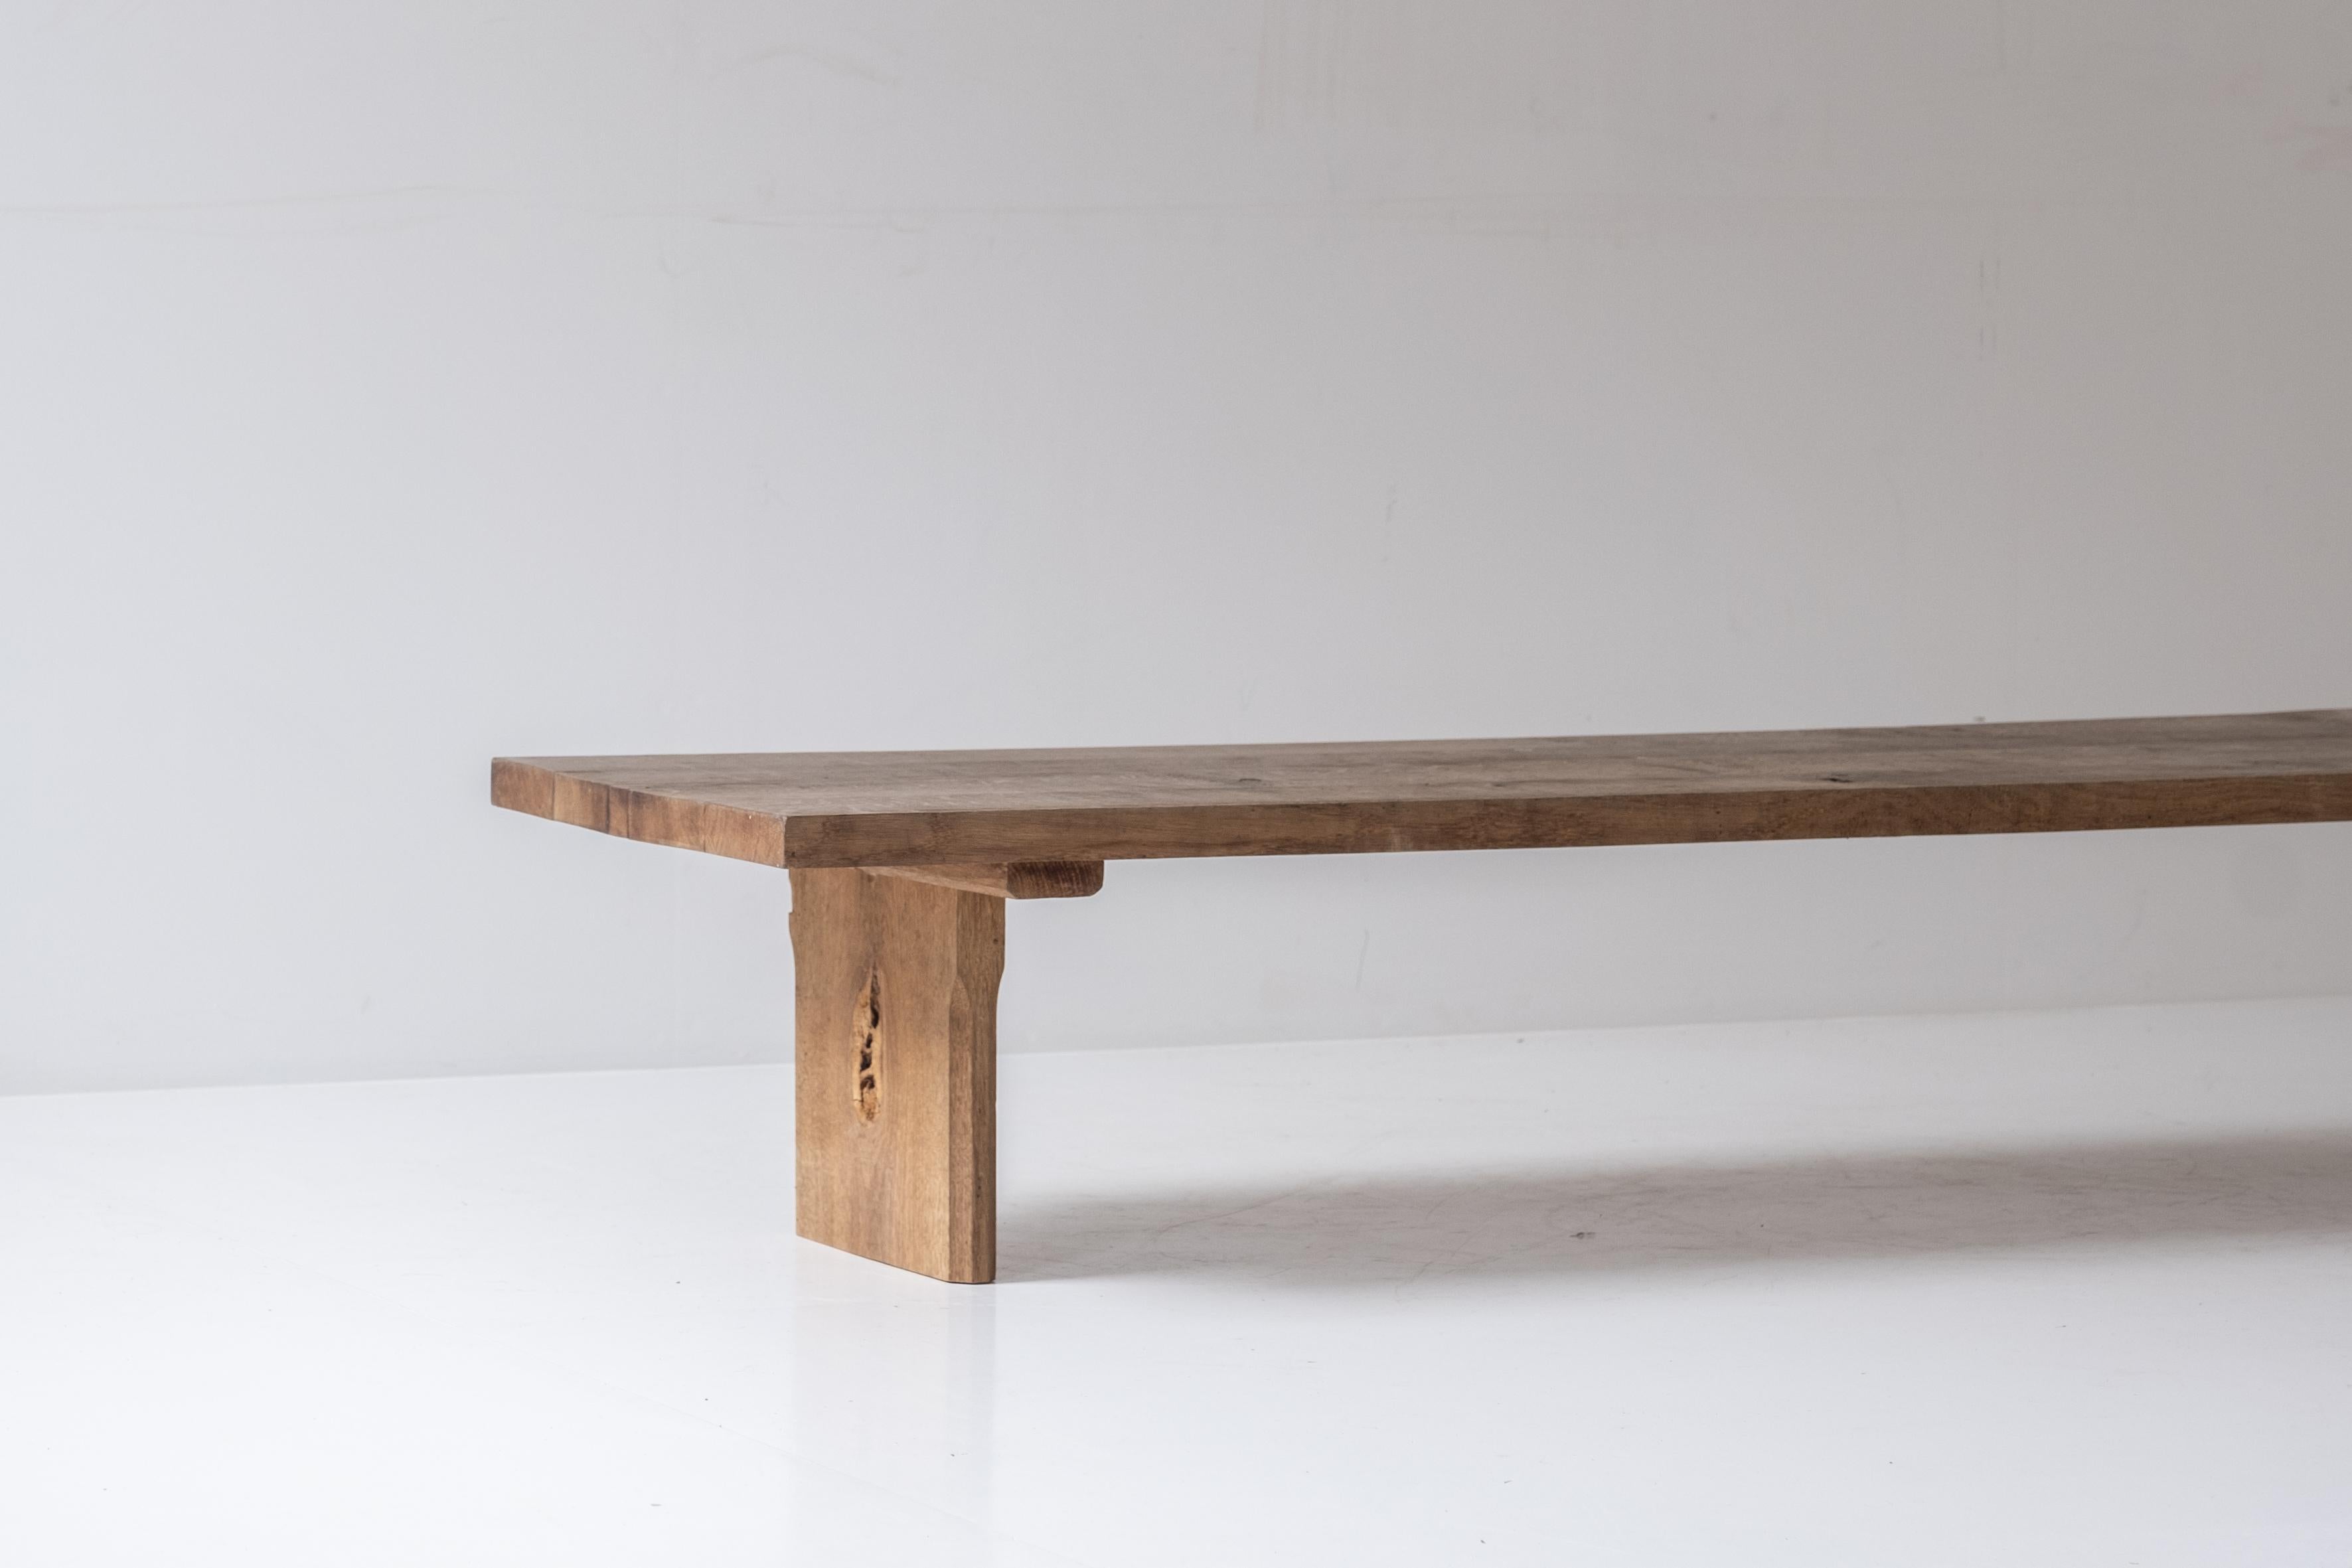 French Low rustic coffee table from France, designed and handmade in the 1950s.